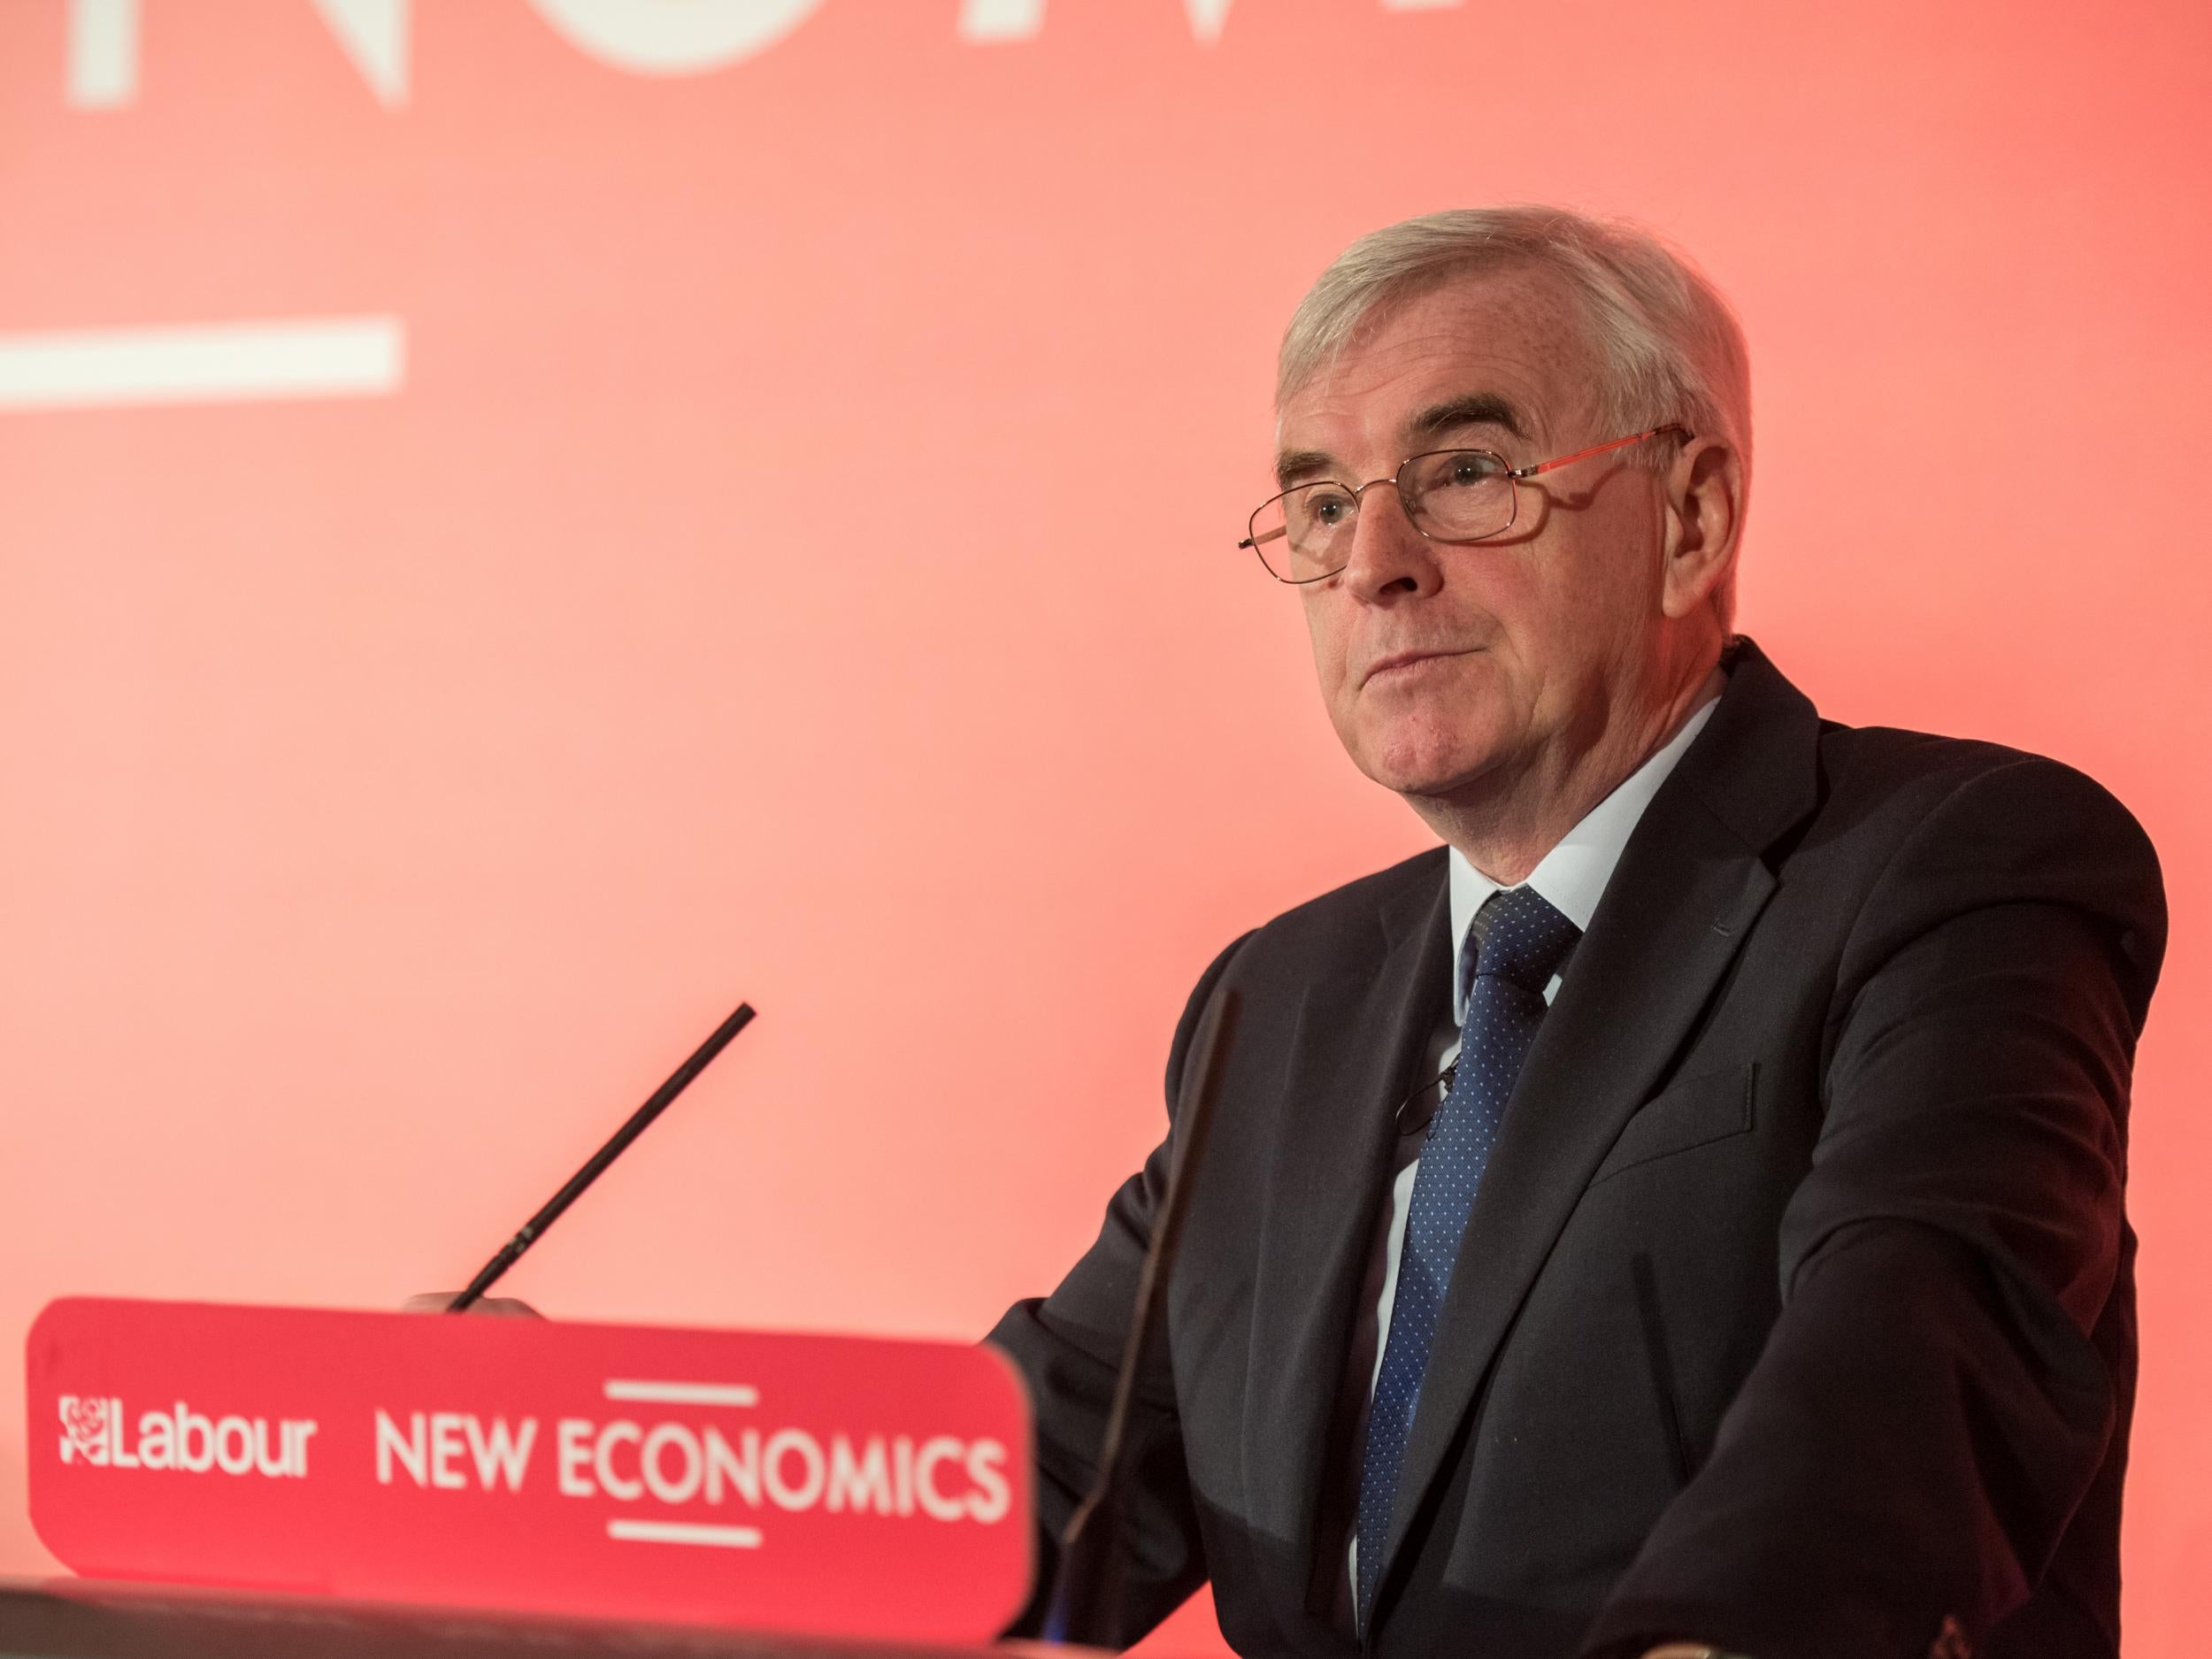 John McDonnell said Labour's plans would 'transform irreversibly the workplace and our working lives'